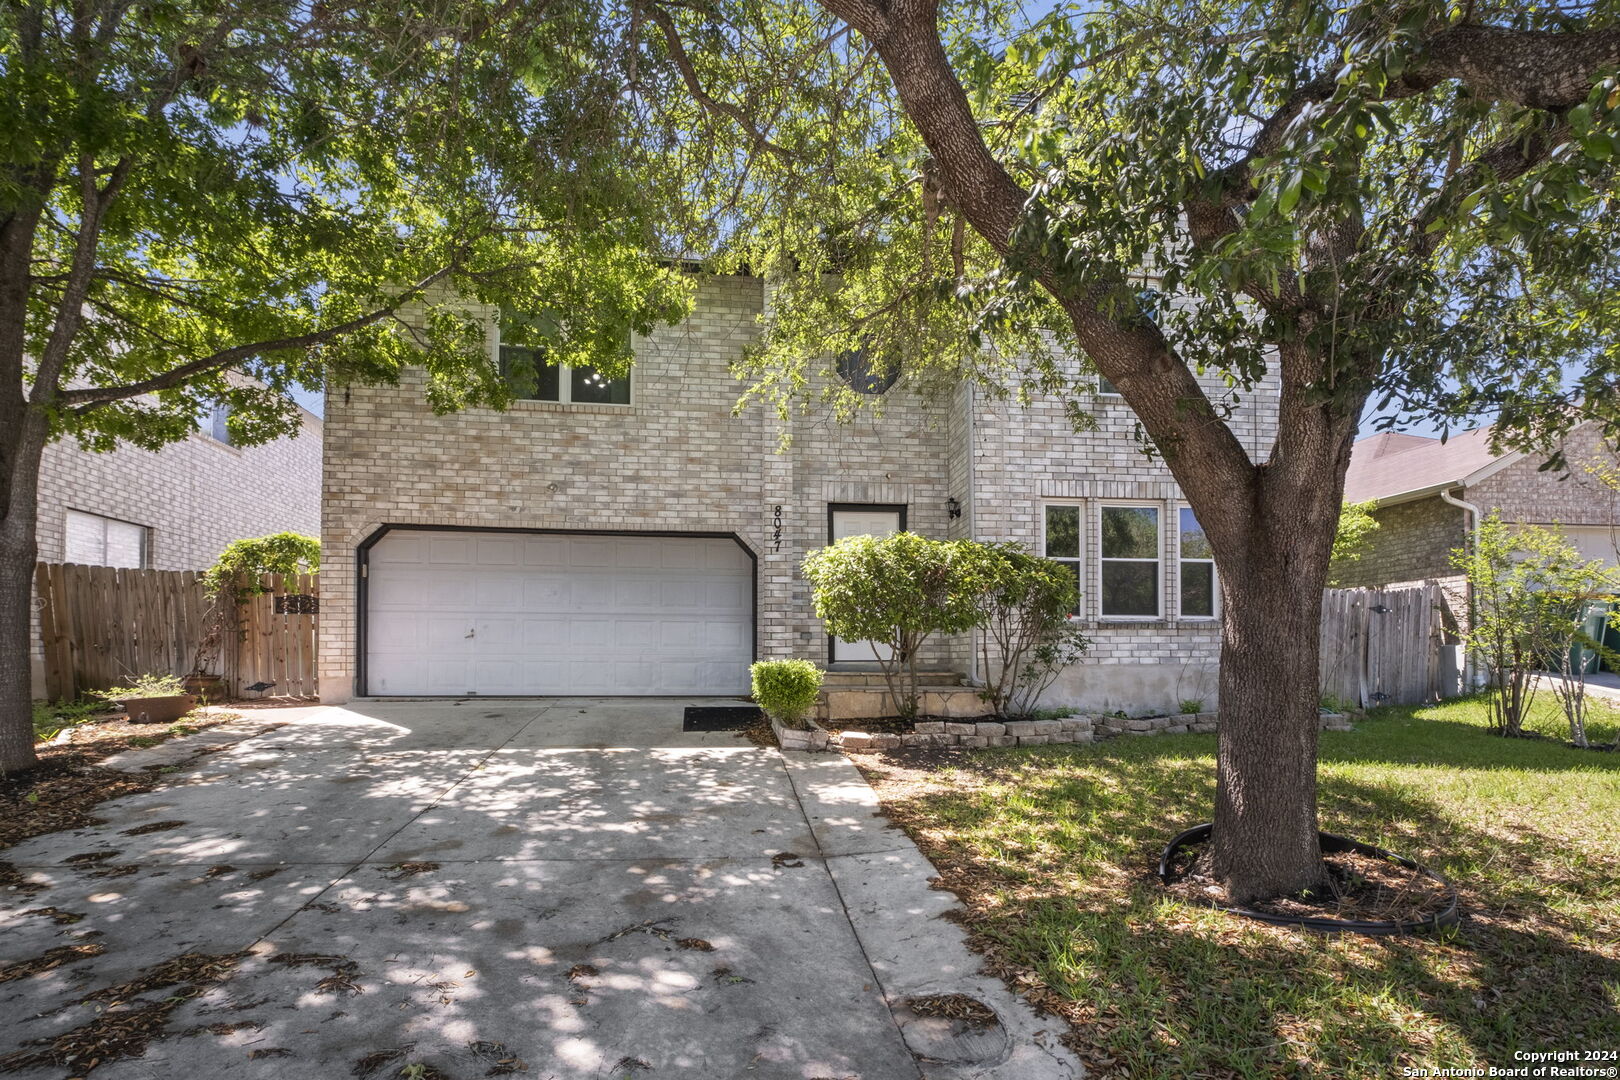 Photo of 8047 Cantura Mls in Converse, TX